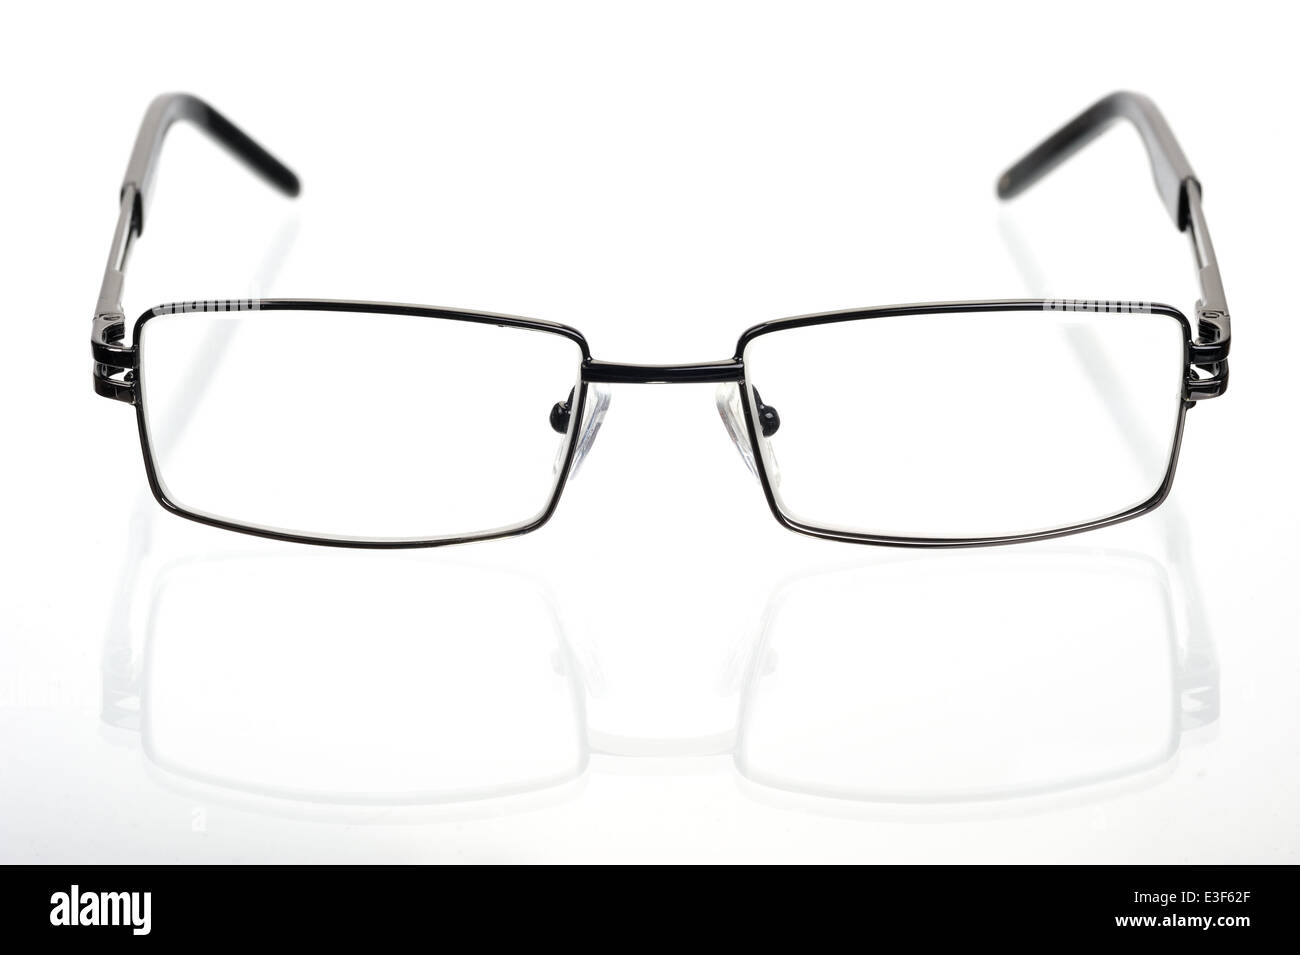 Rectangular glasses in a thin metal frame on a white background Stock Photo  - Alamy